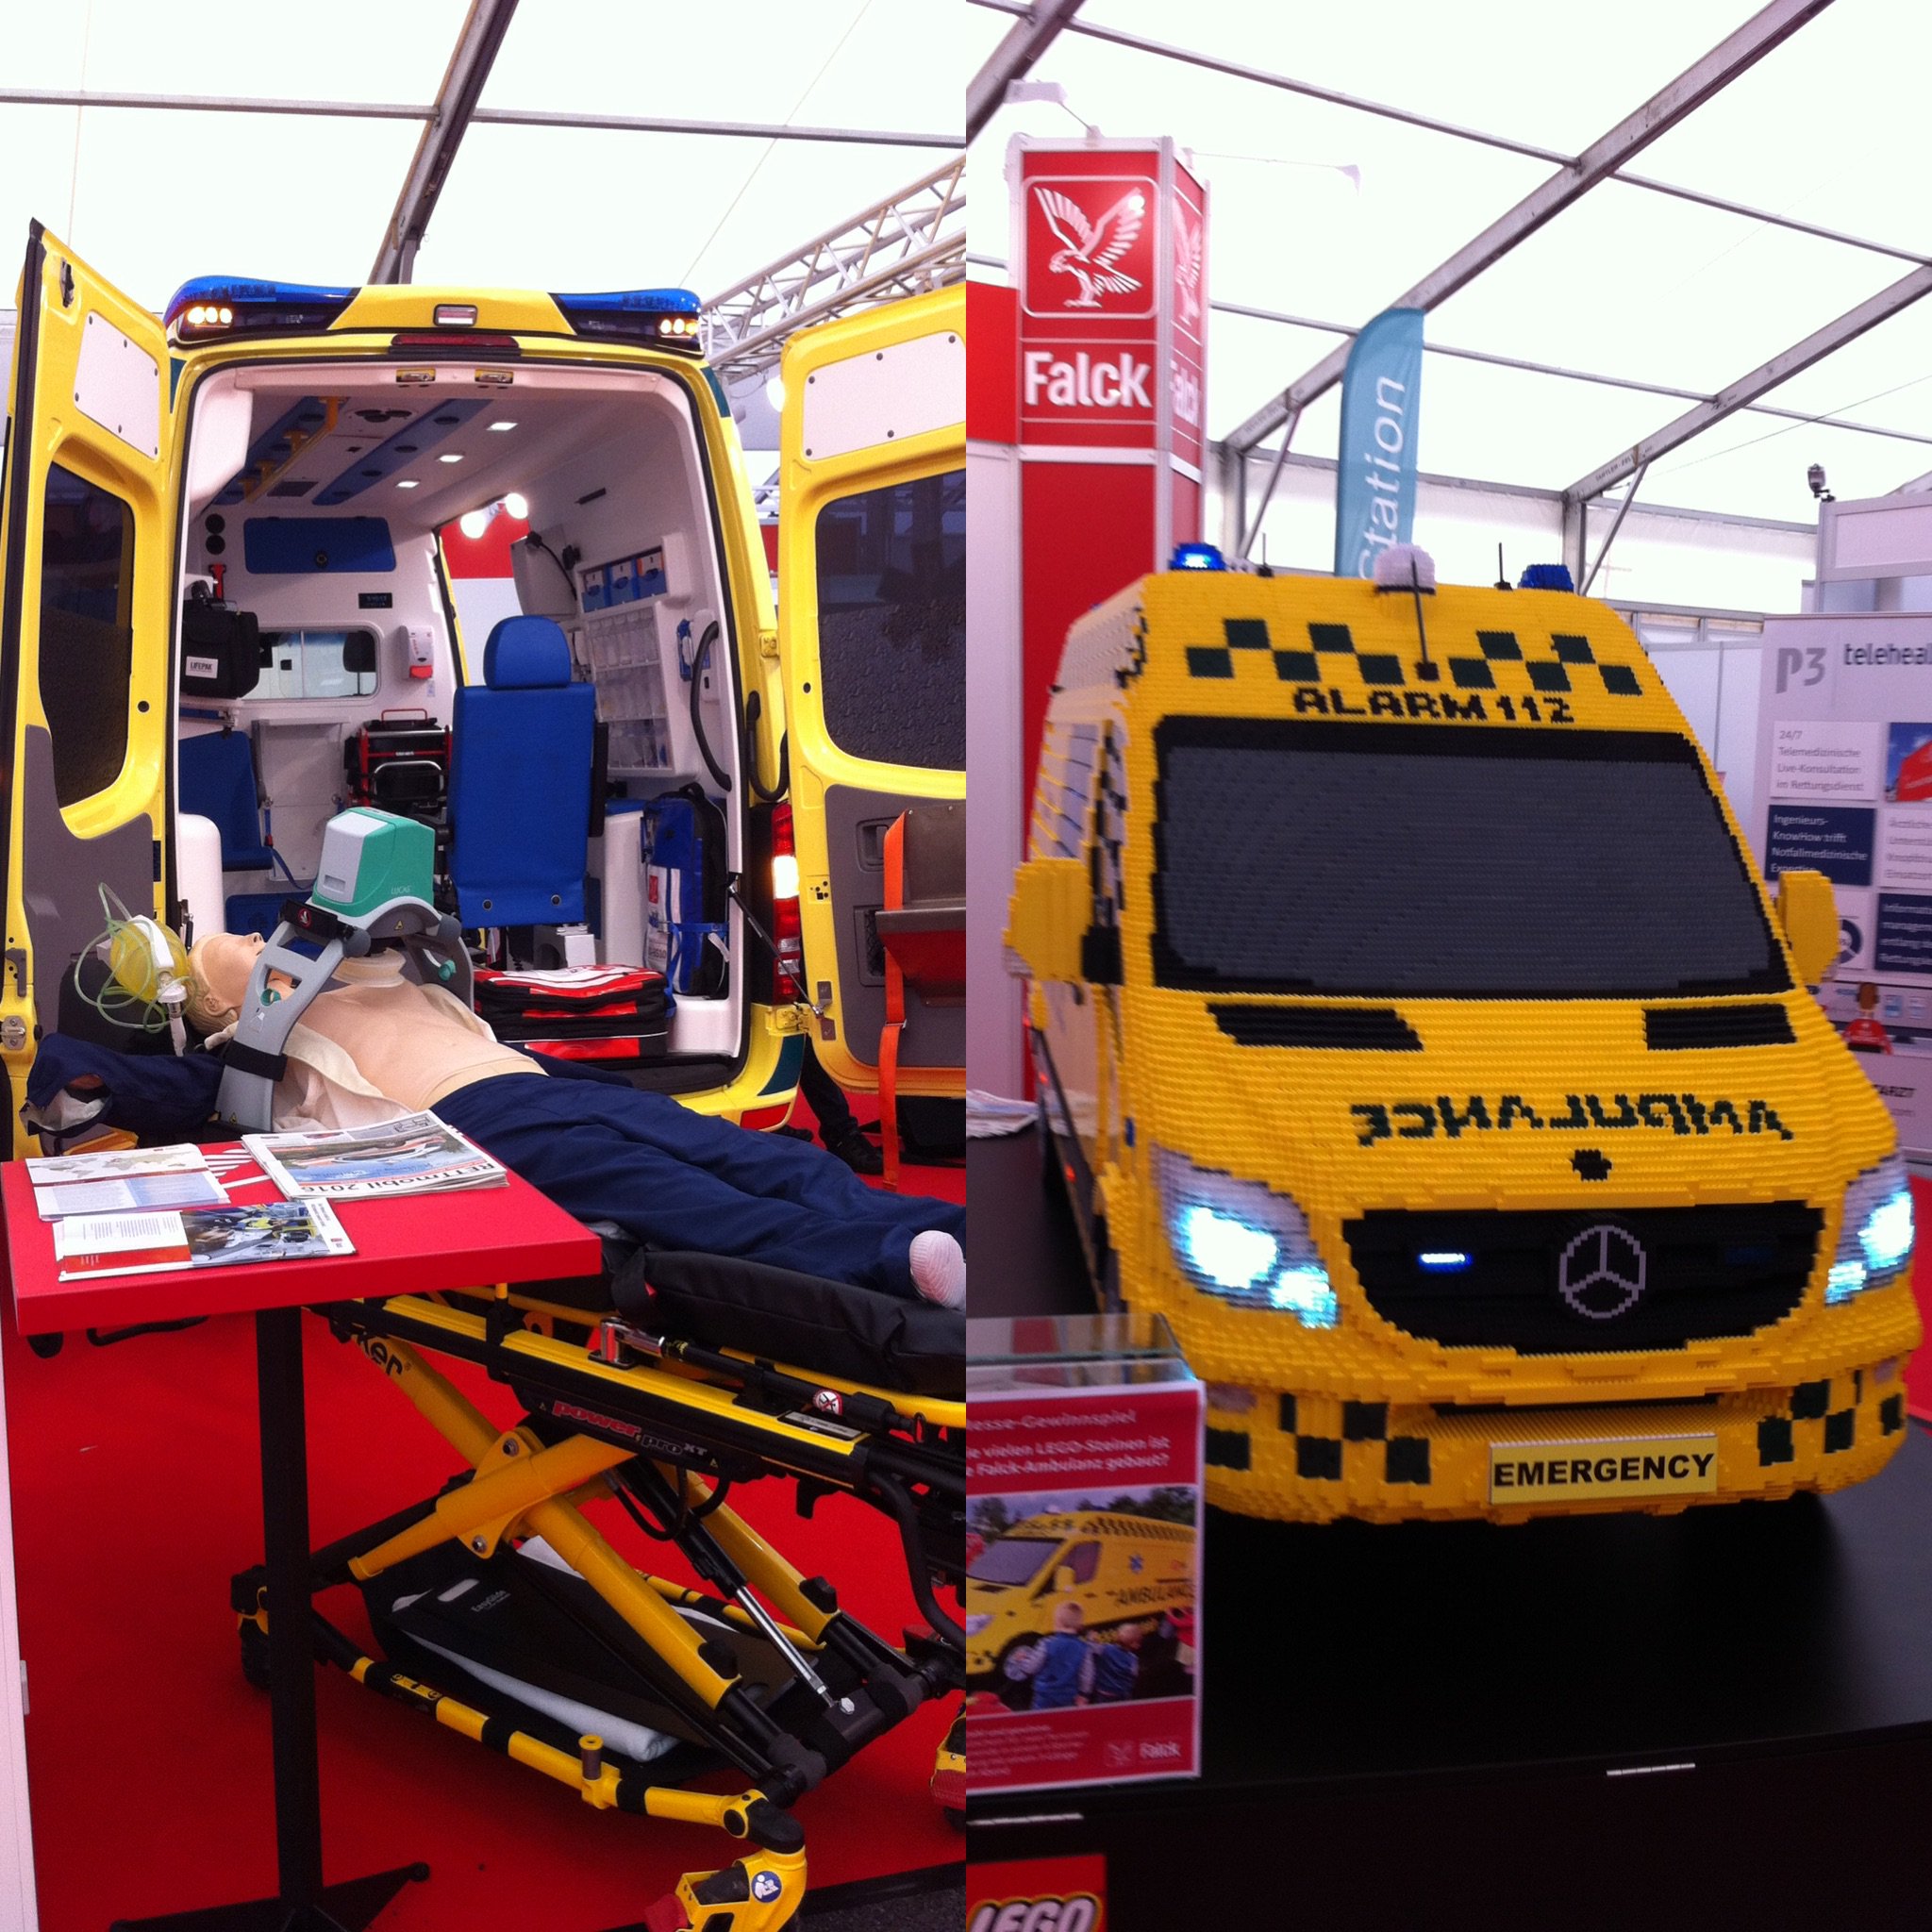 European EMS Leadership on Twitter: "At #RETTmobil in #Falck is showcasing LEGO-ambulance &amp; new Europe ambulance both will also at #EMS2016 https://t.co/79VH9Fmr1x" / Twitter